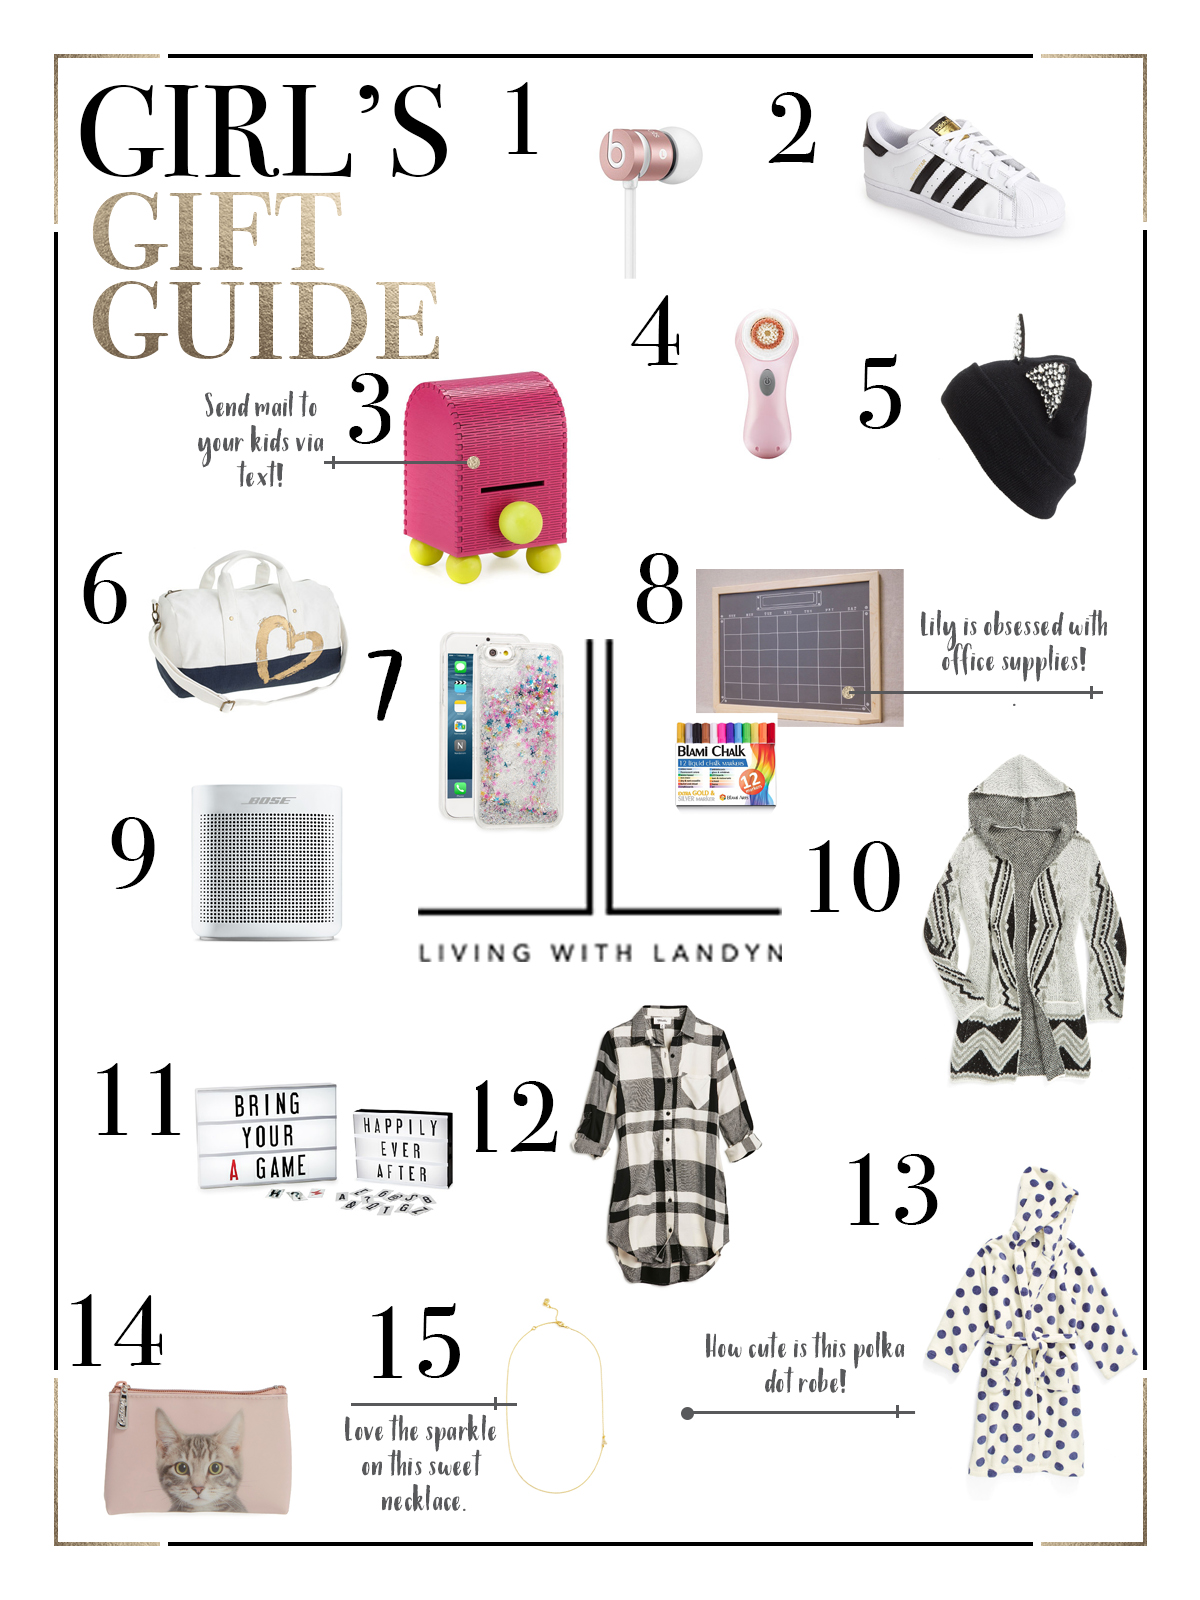 Gift Guide For Teen Girls - The Lilypad Cottage